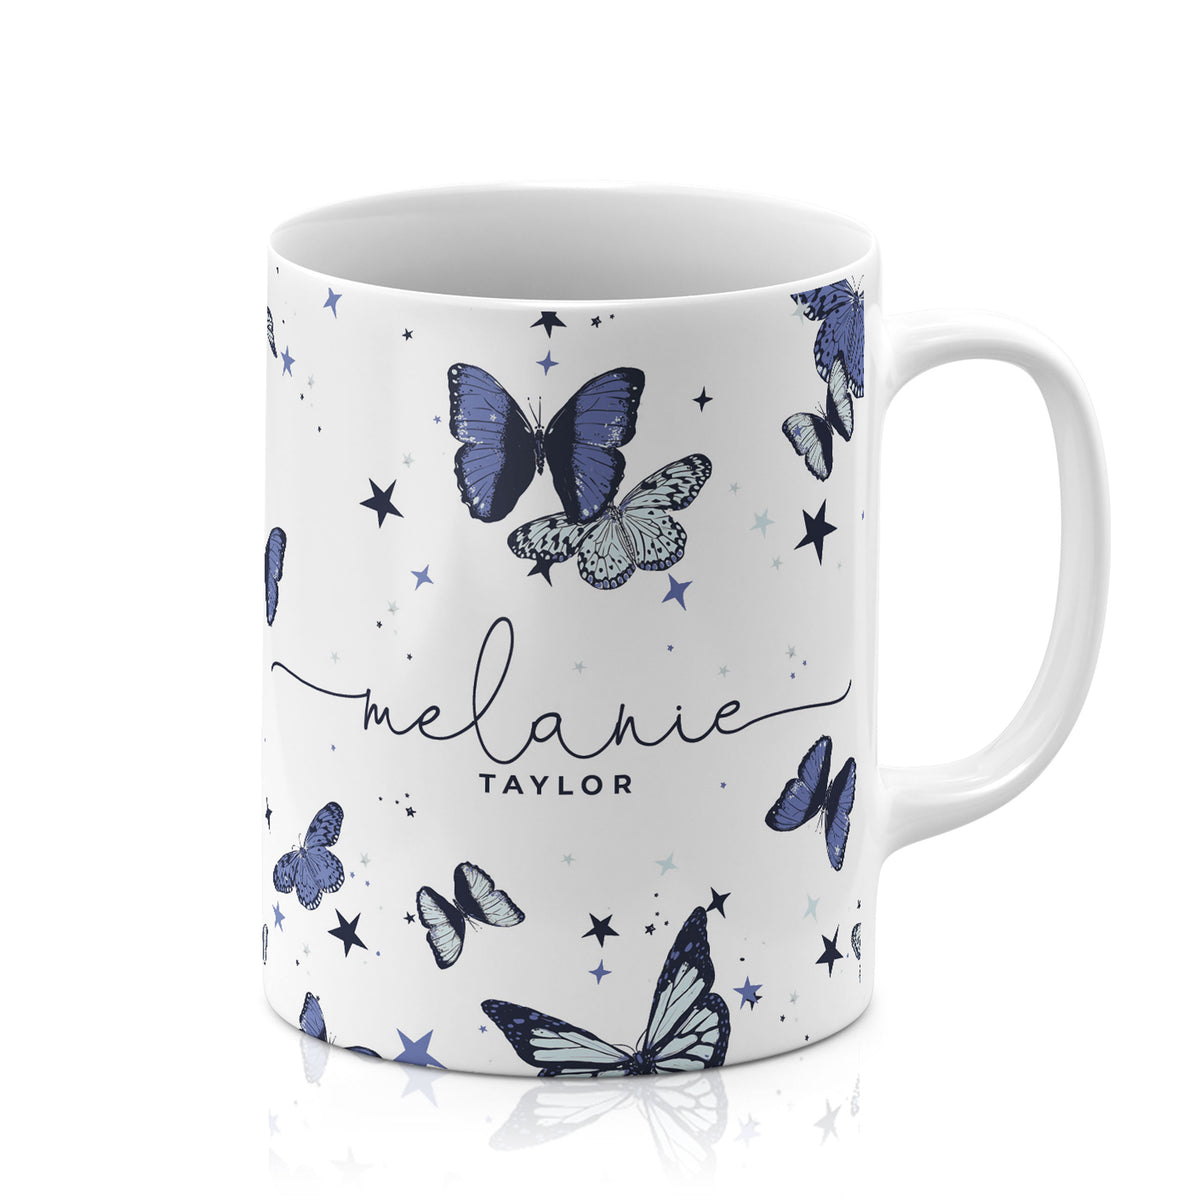 Personalised Ceramic Mug with Name Initials Text Butterflies Blue